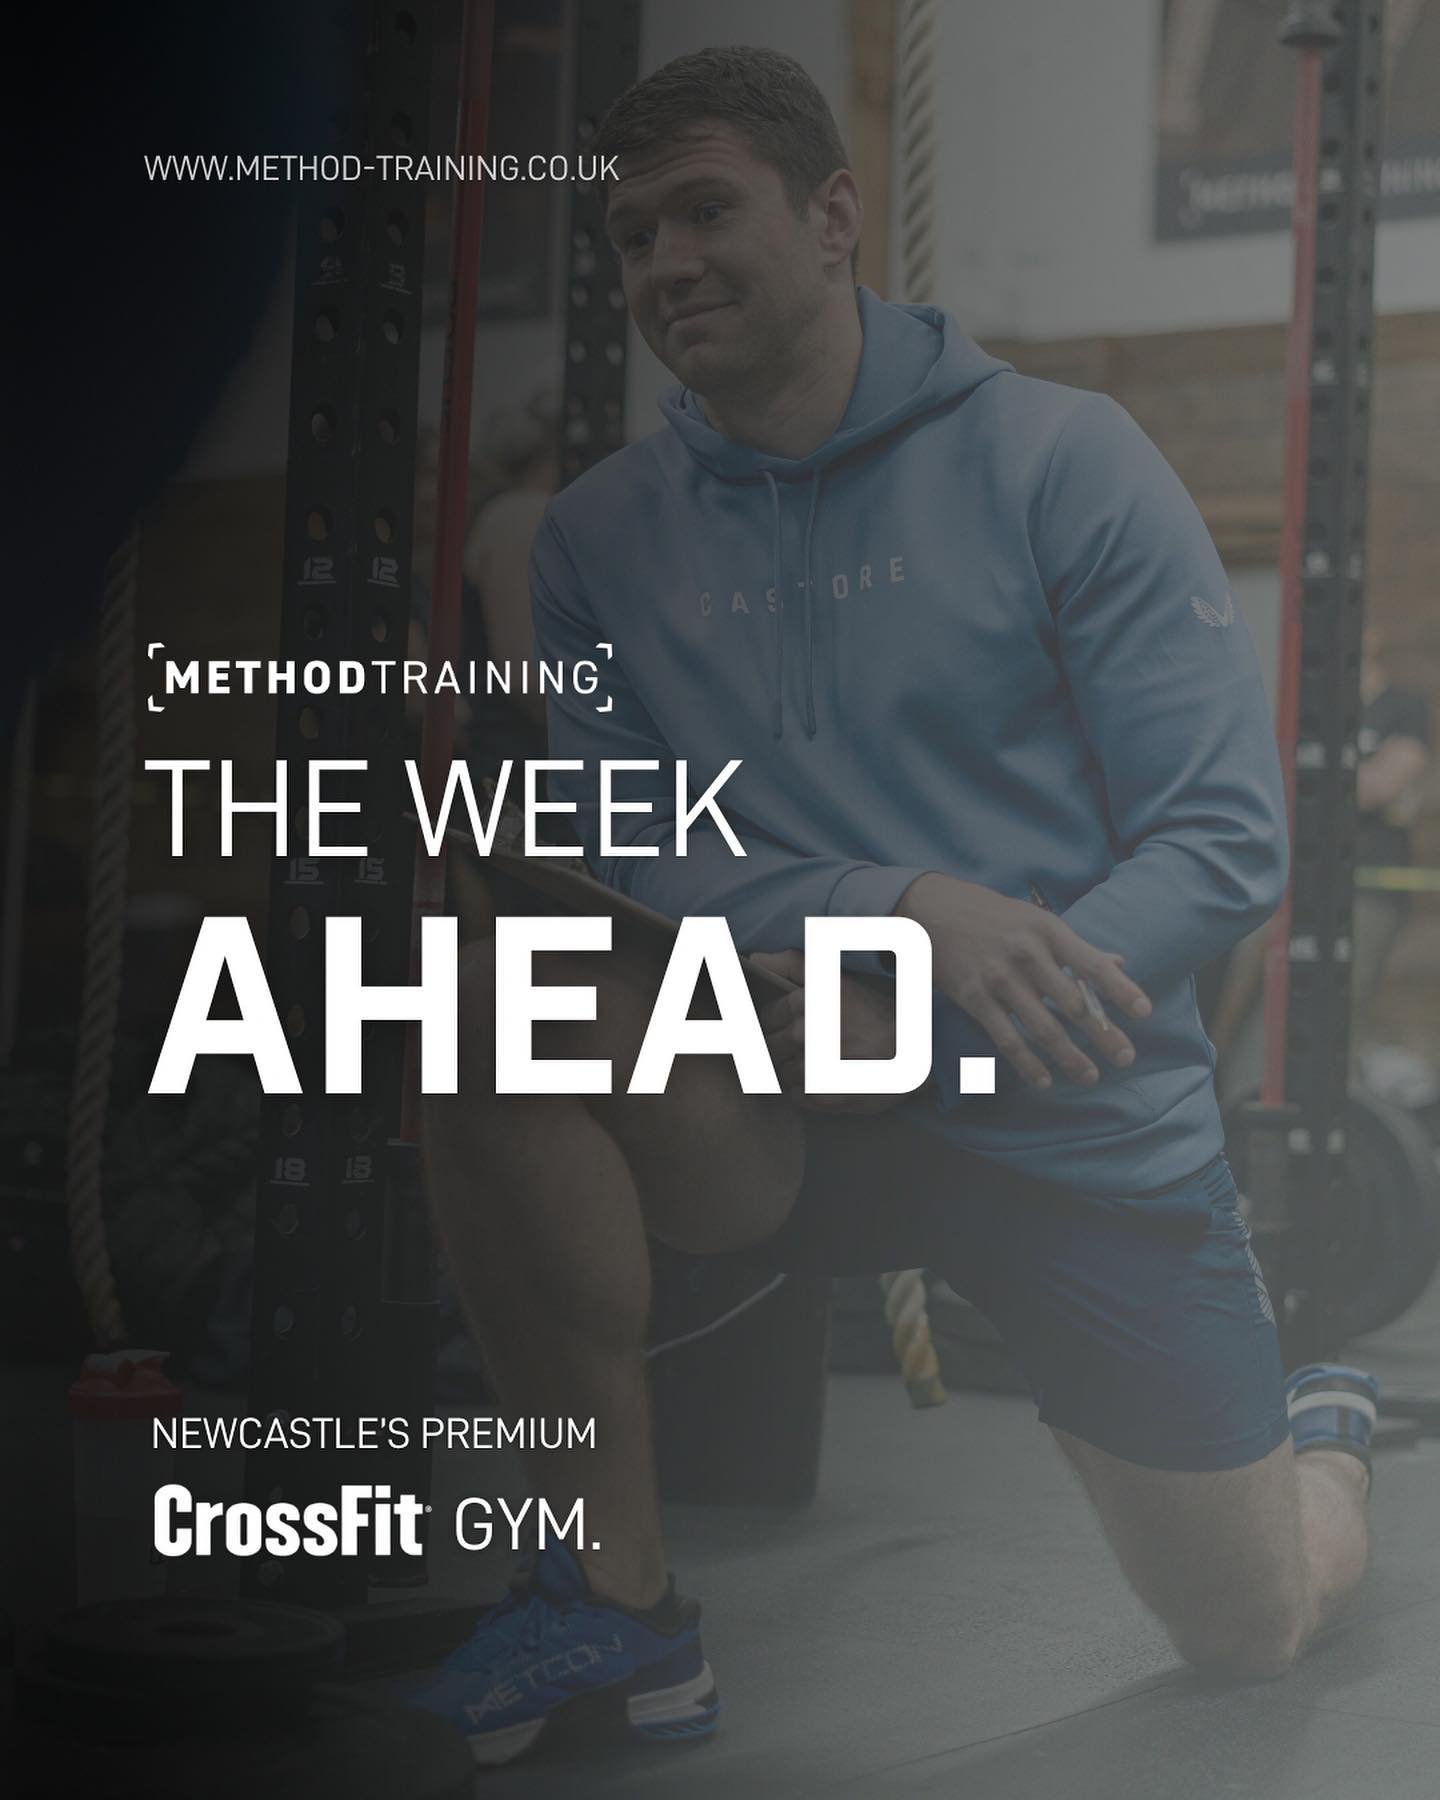 Your week ahead at Method Training.

Swipe to see what&rsquo;s in store for the upcoming week &lt;&lt;&lt;&lt;